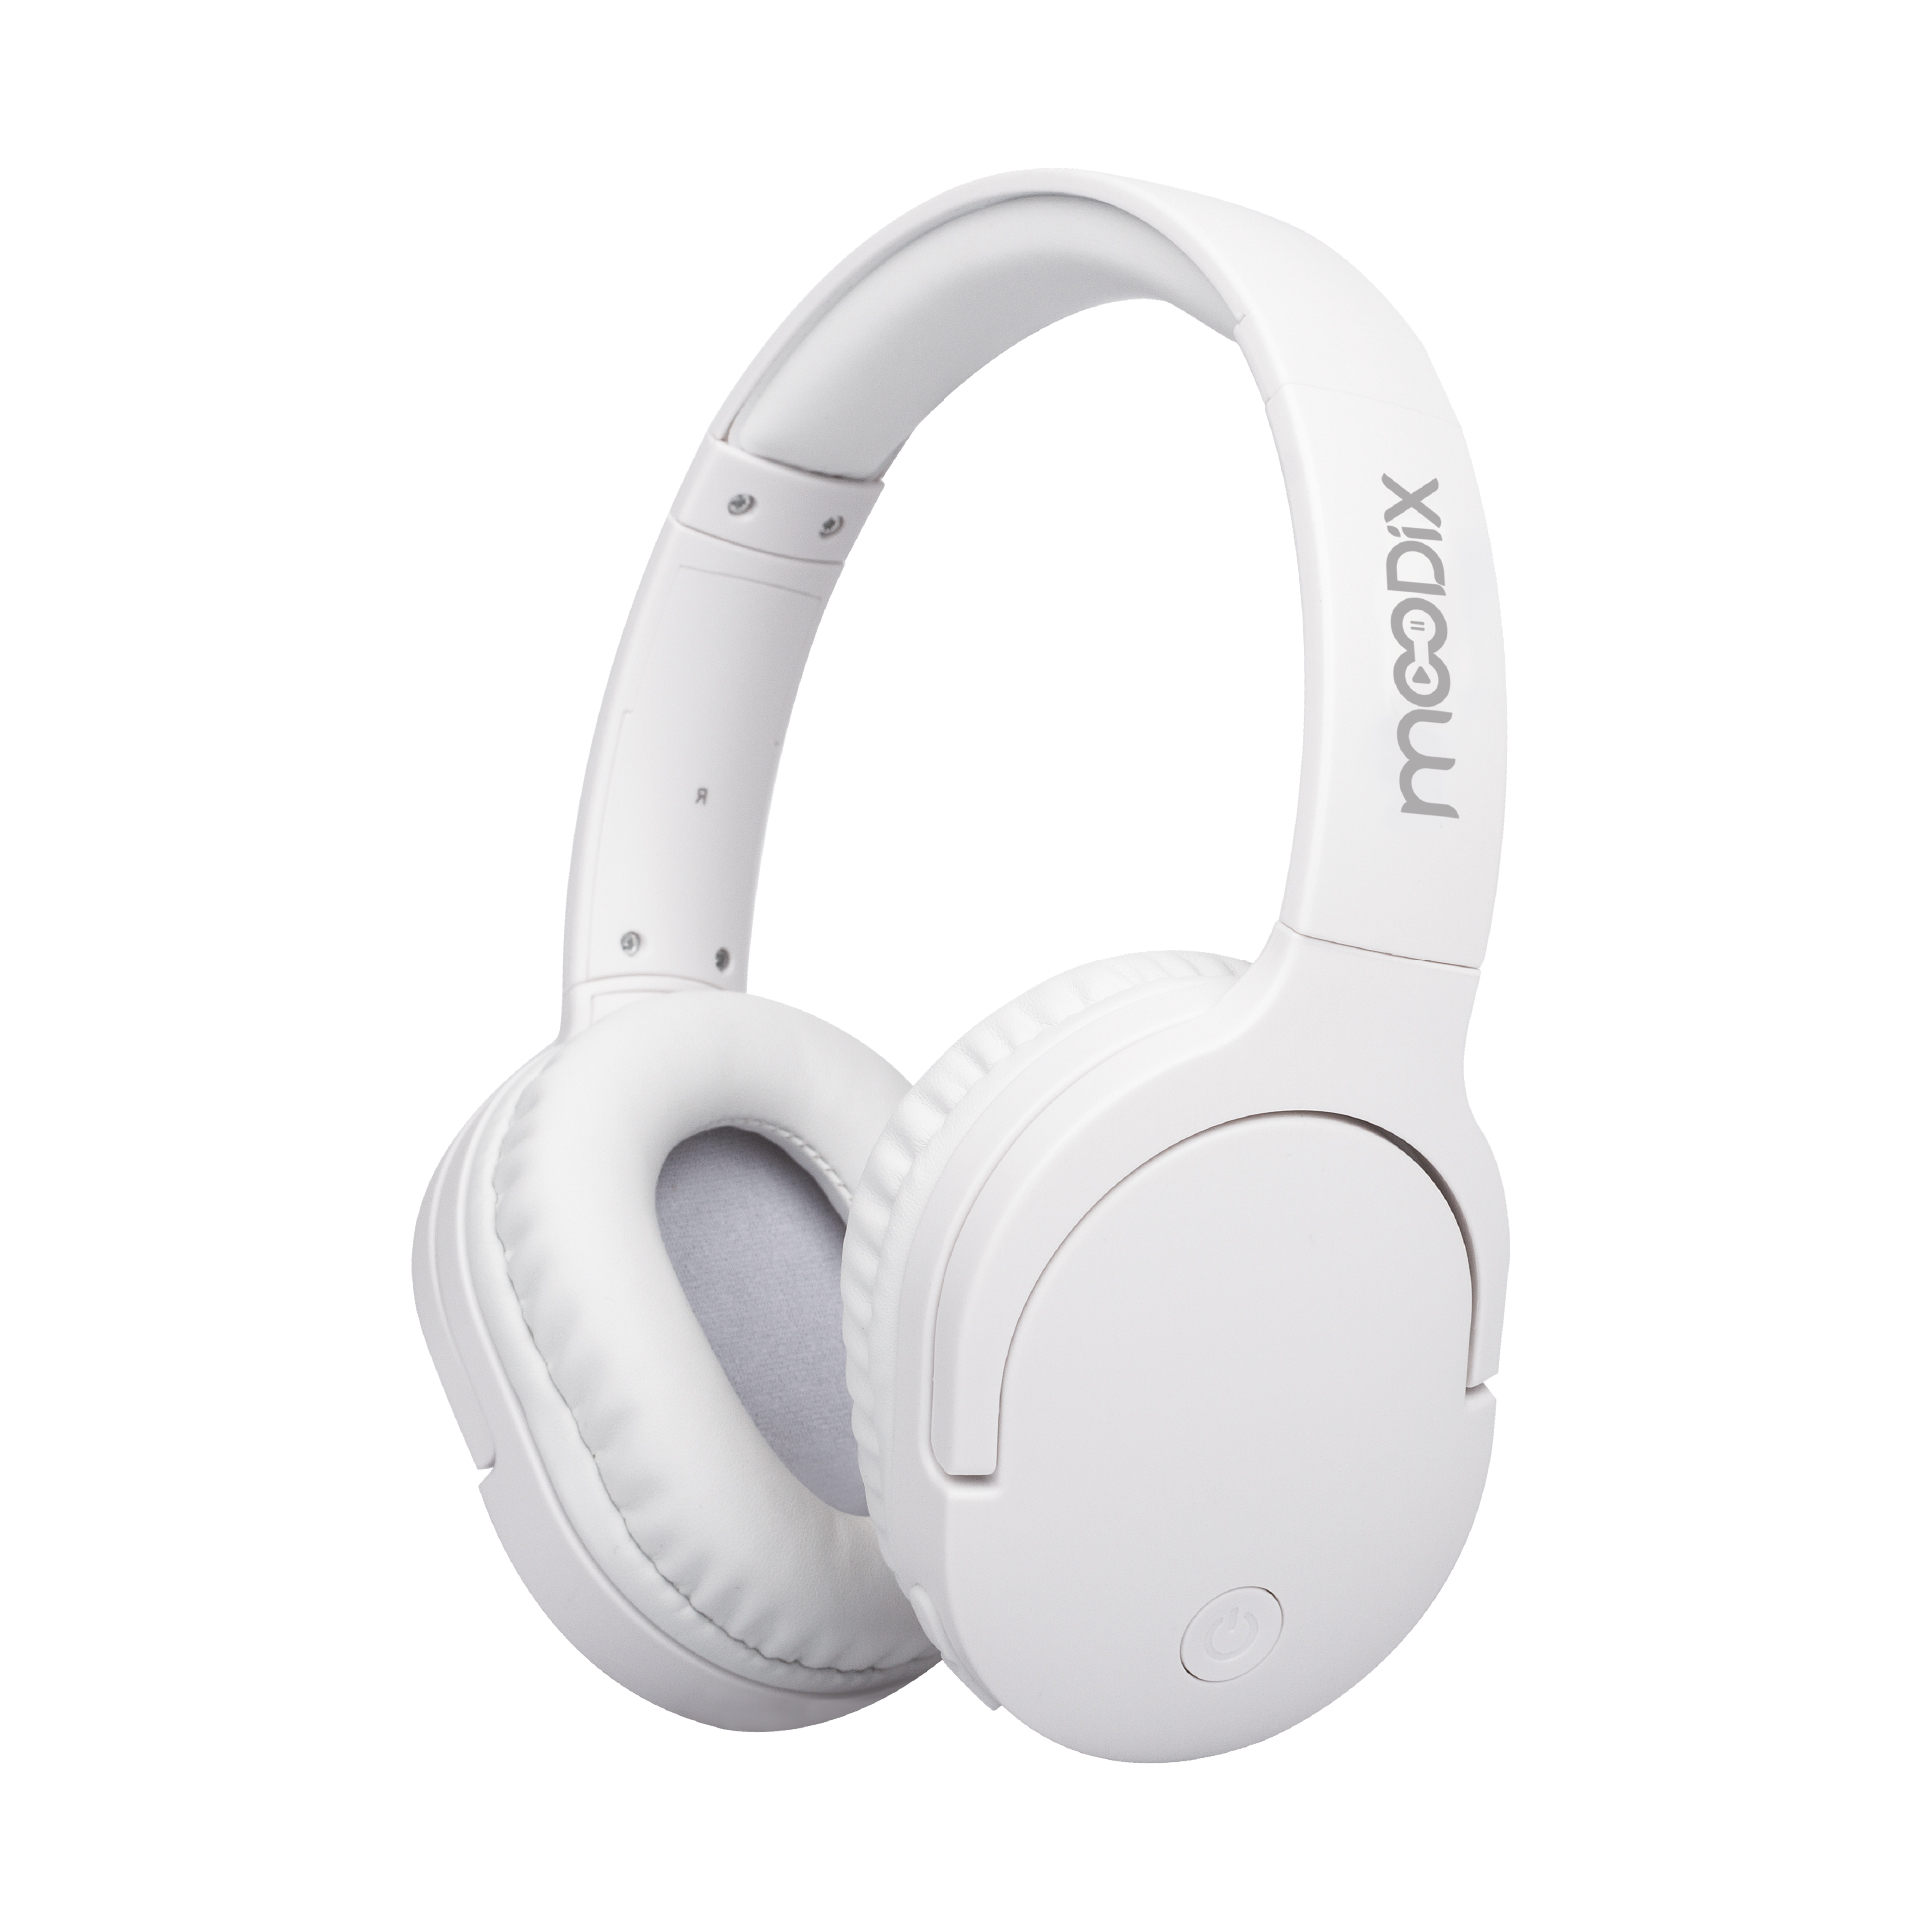 Moodix Bluetooth On-Ear Headphones, iPhone and Android Compatible Wireless Headphones, Lightweight Over-Ear Loud Headphones with Deep Bass, White